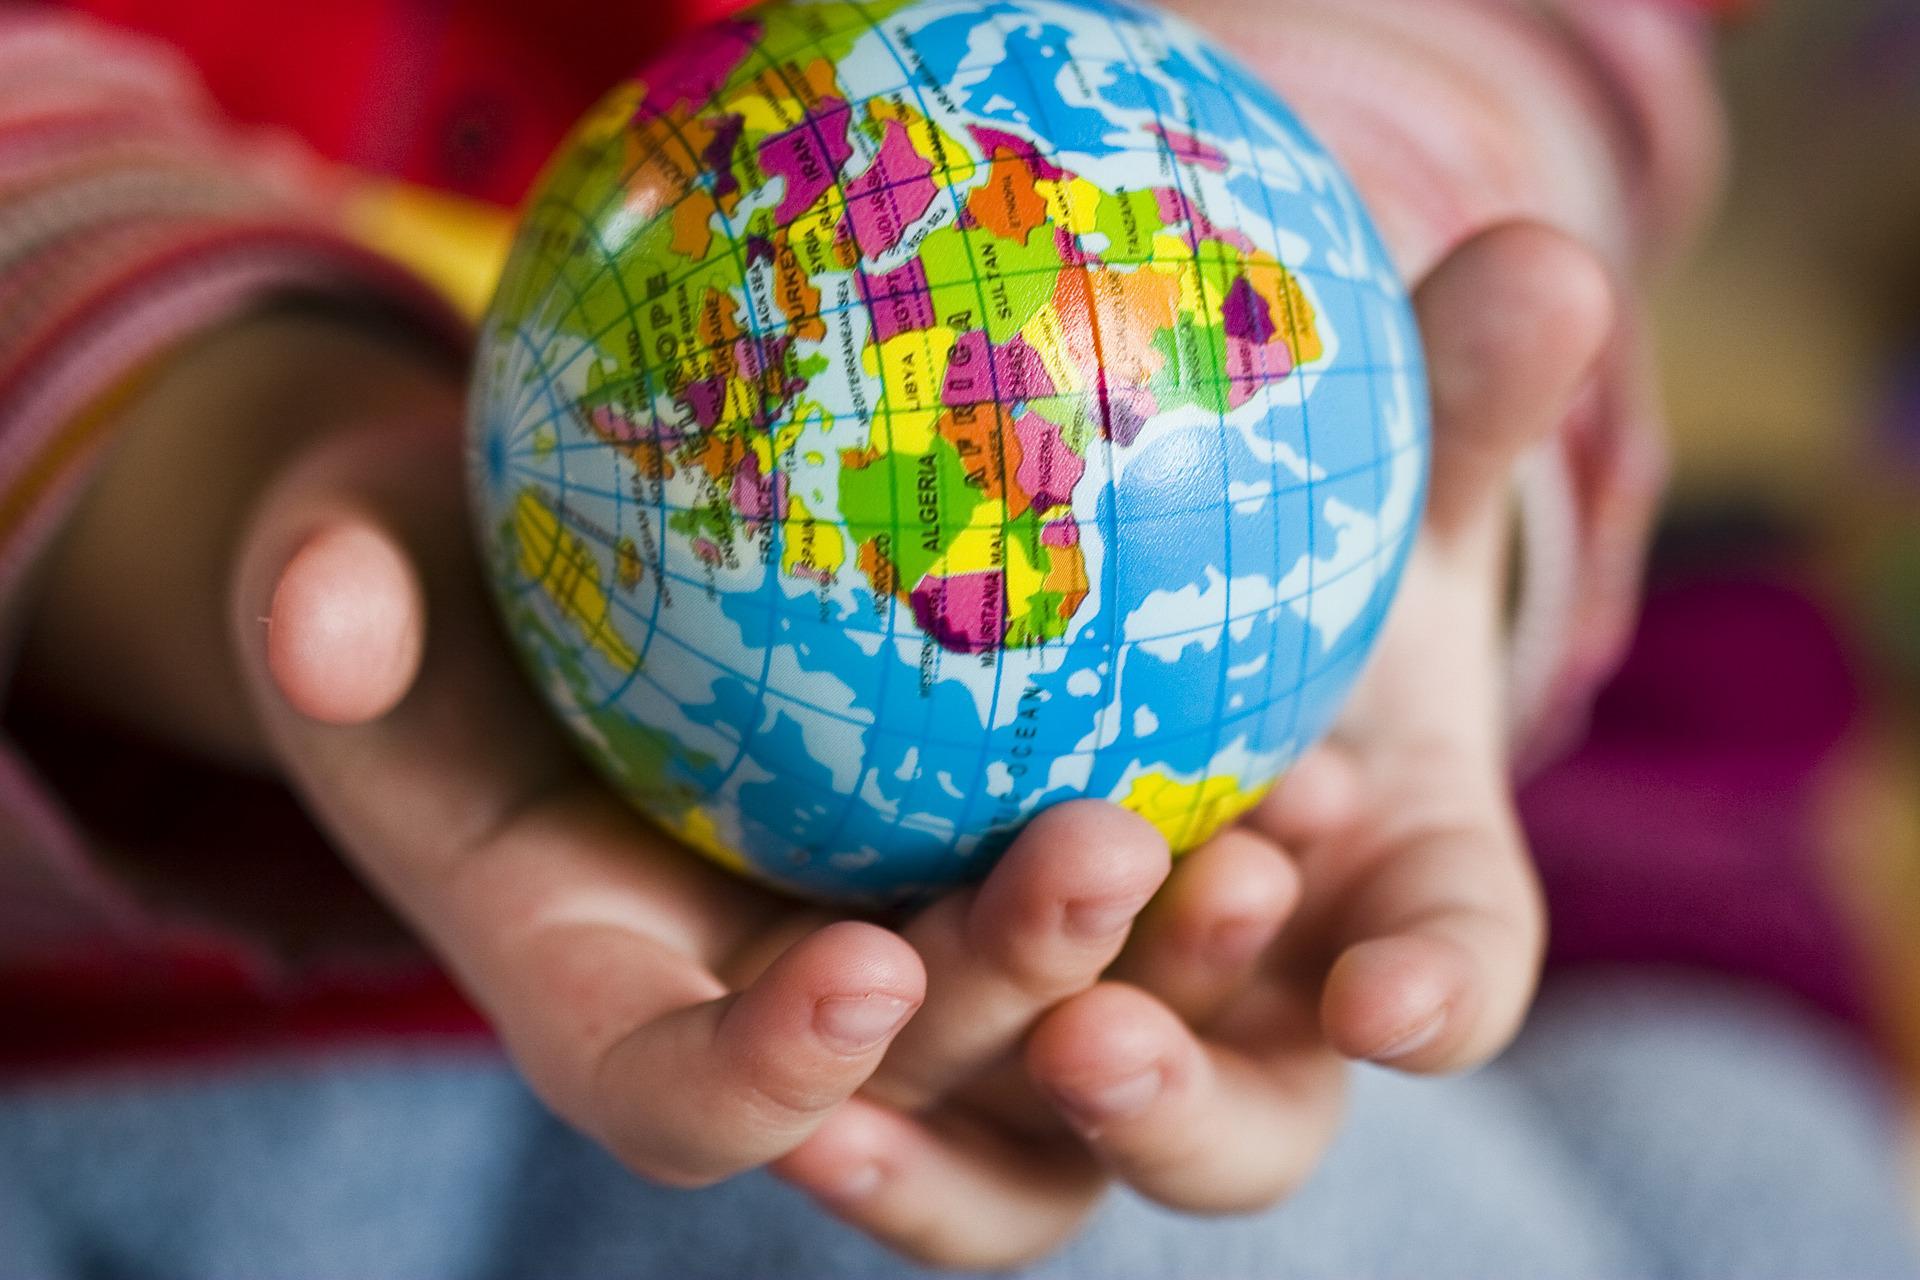 A small ball with the globe printed on it sits in a pair of hands that look like they belong to a small child